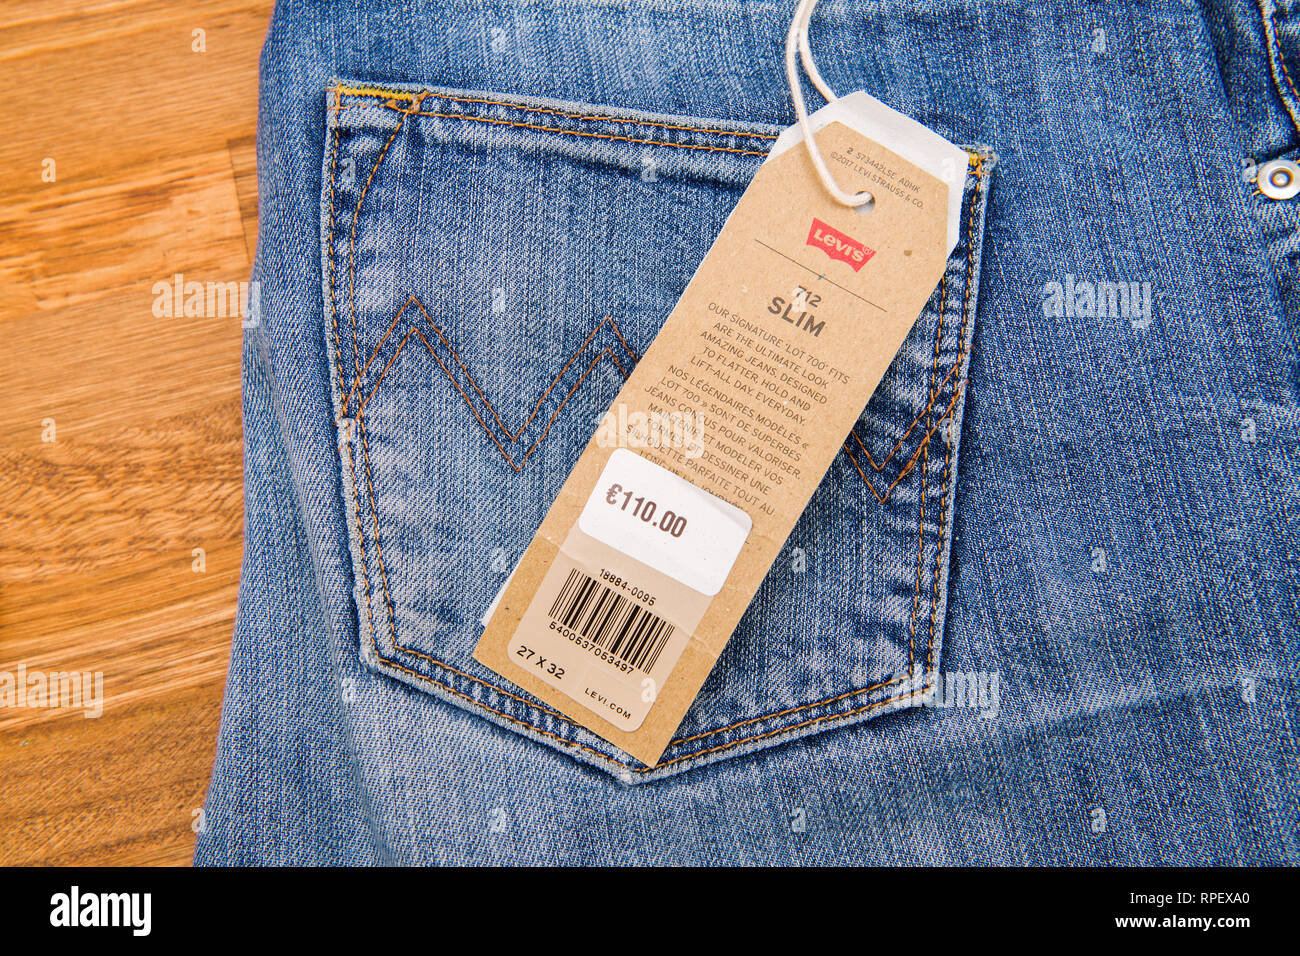 Levis Casual High Resolution Stock 